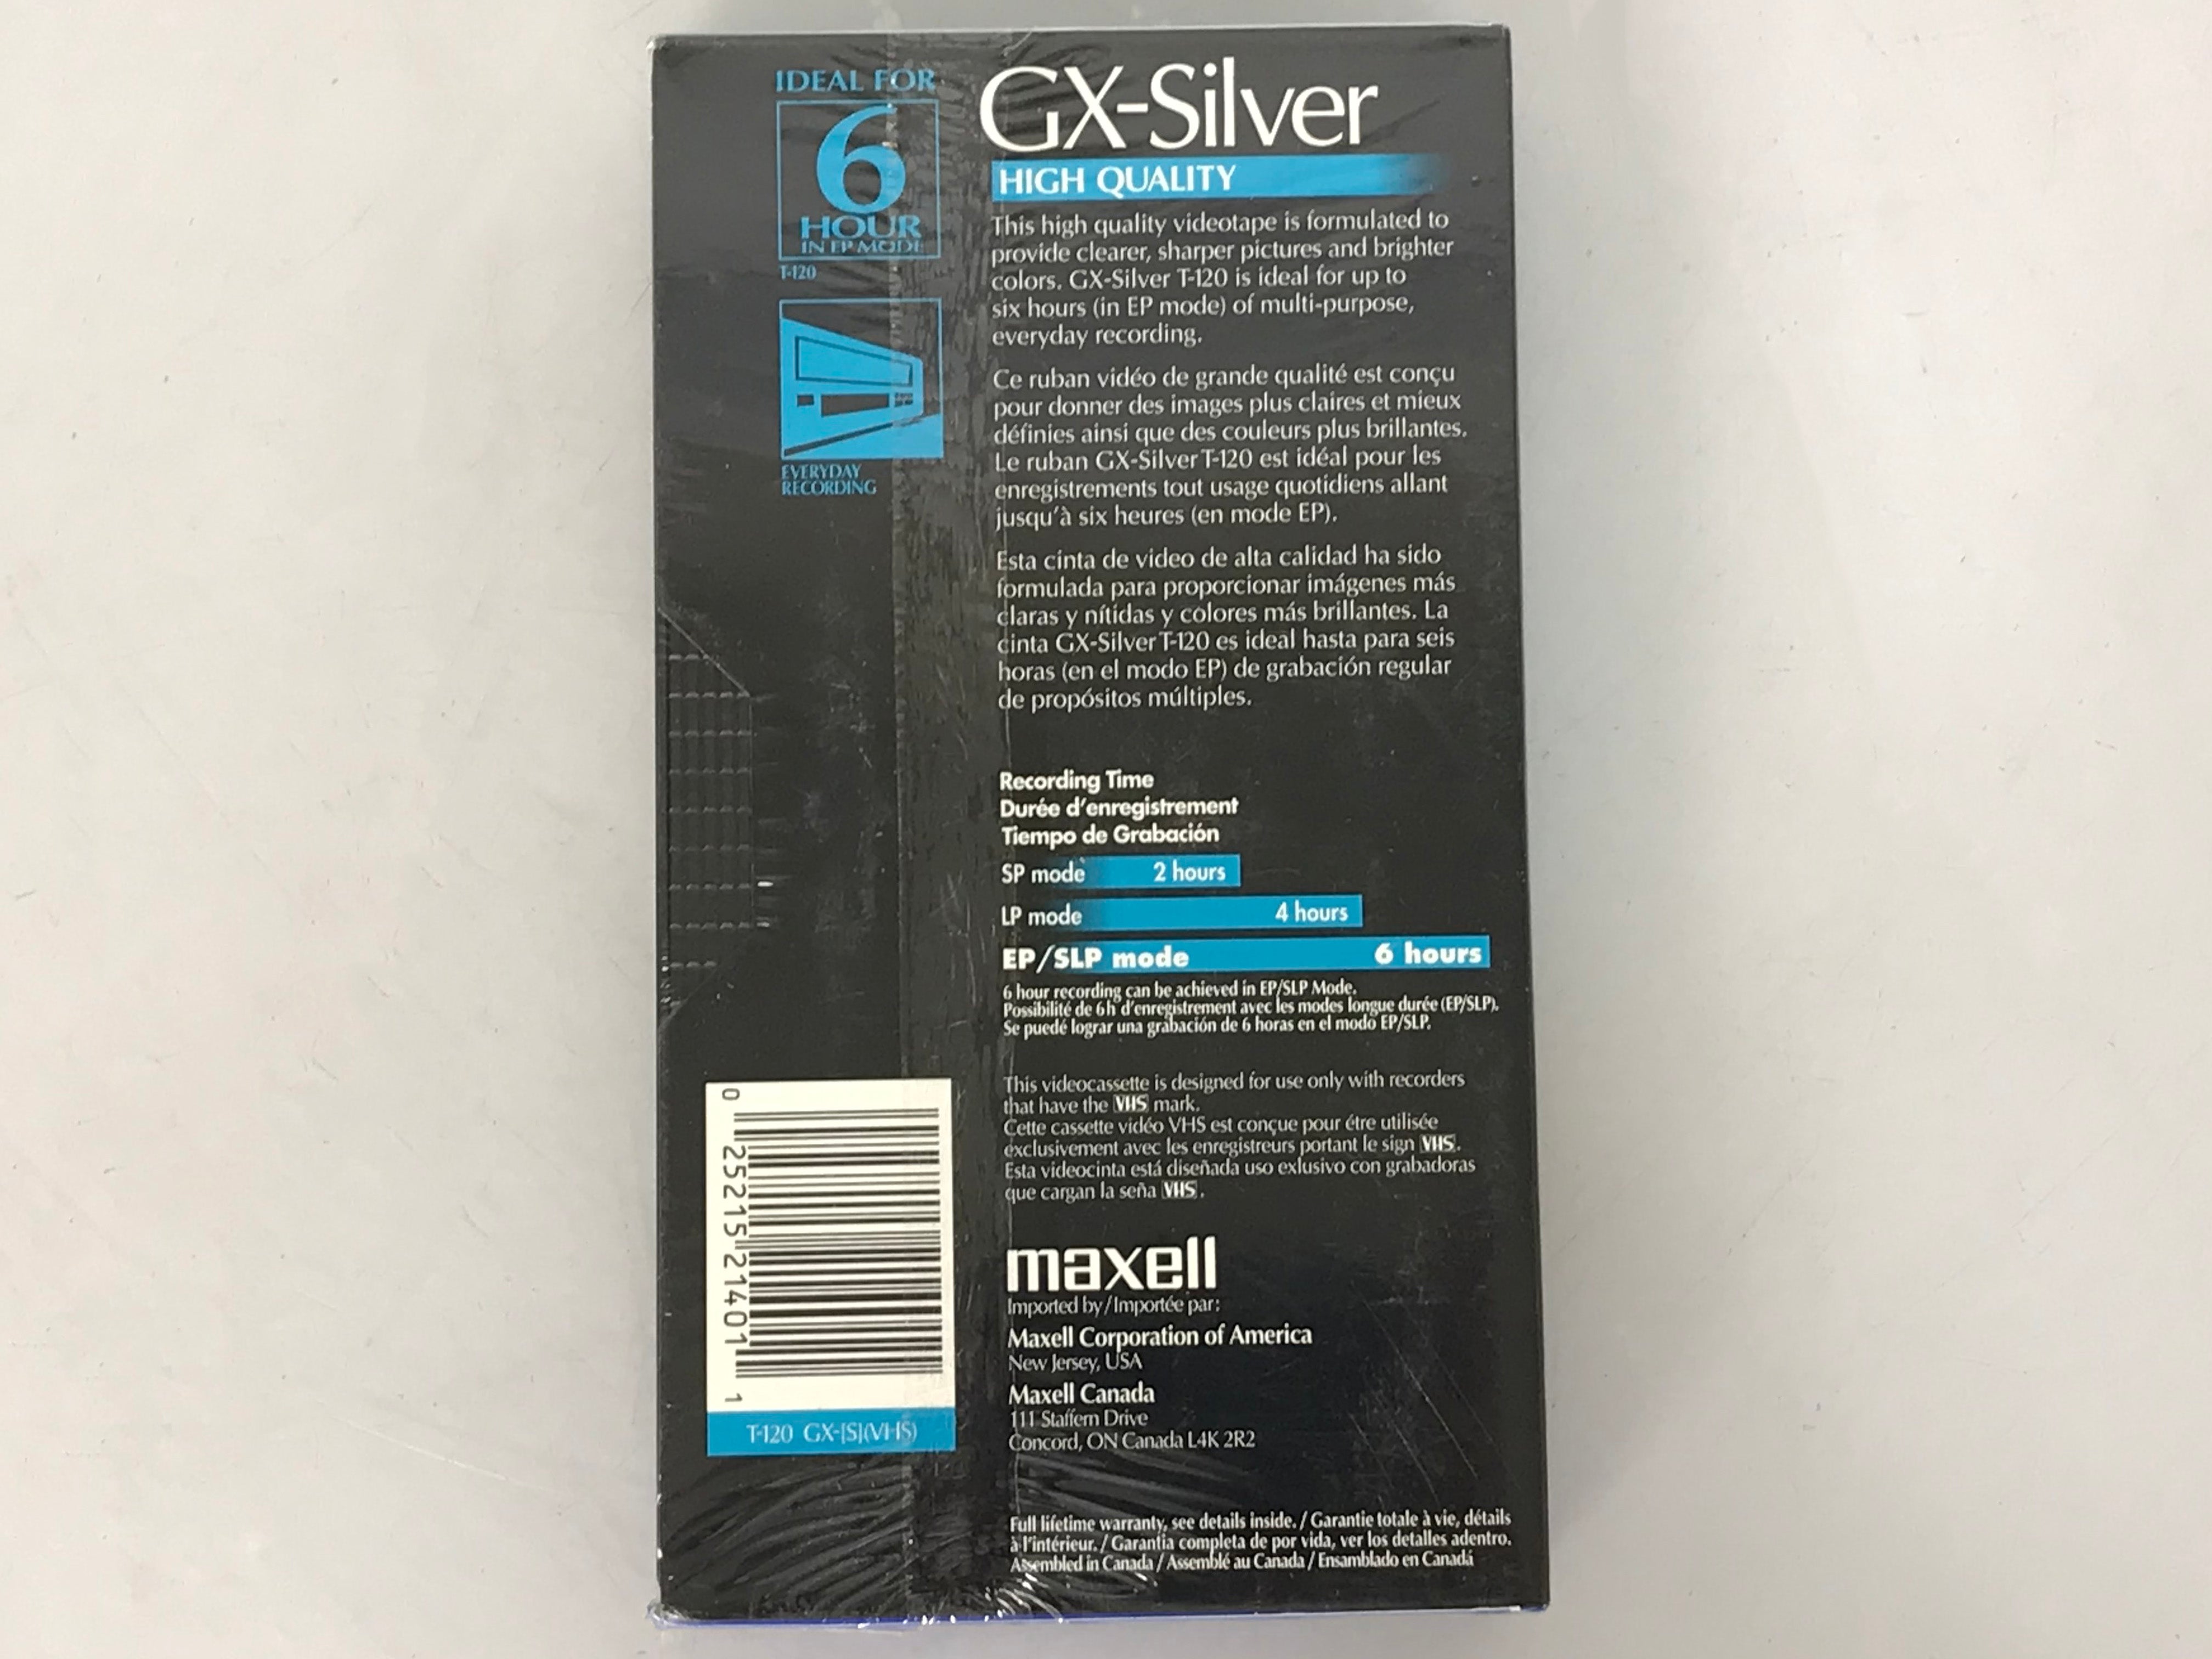 Maxell T120 GX-Silver High Quality VHS Video Blank Tapes